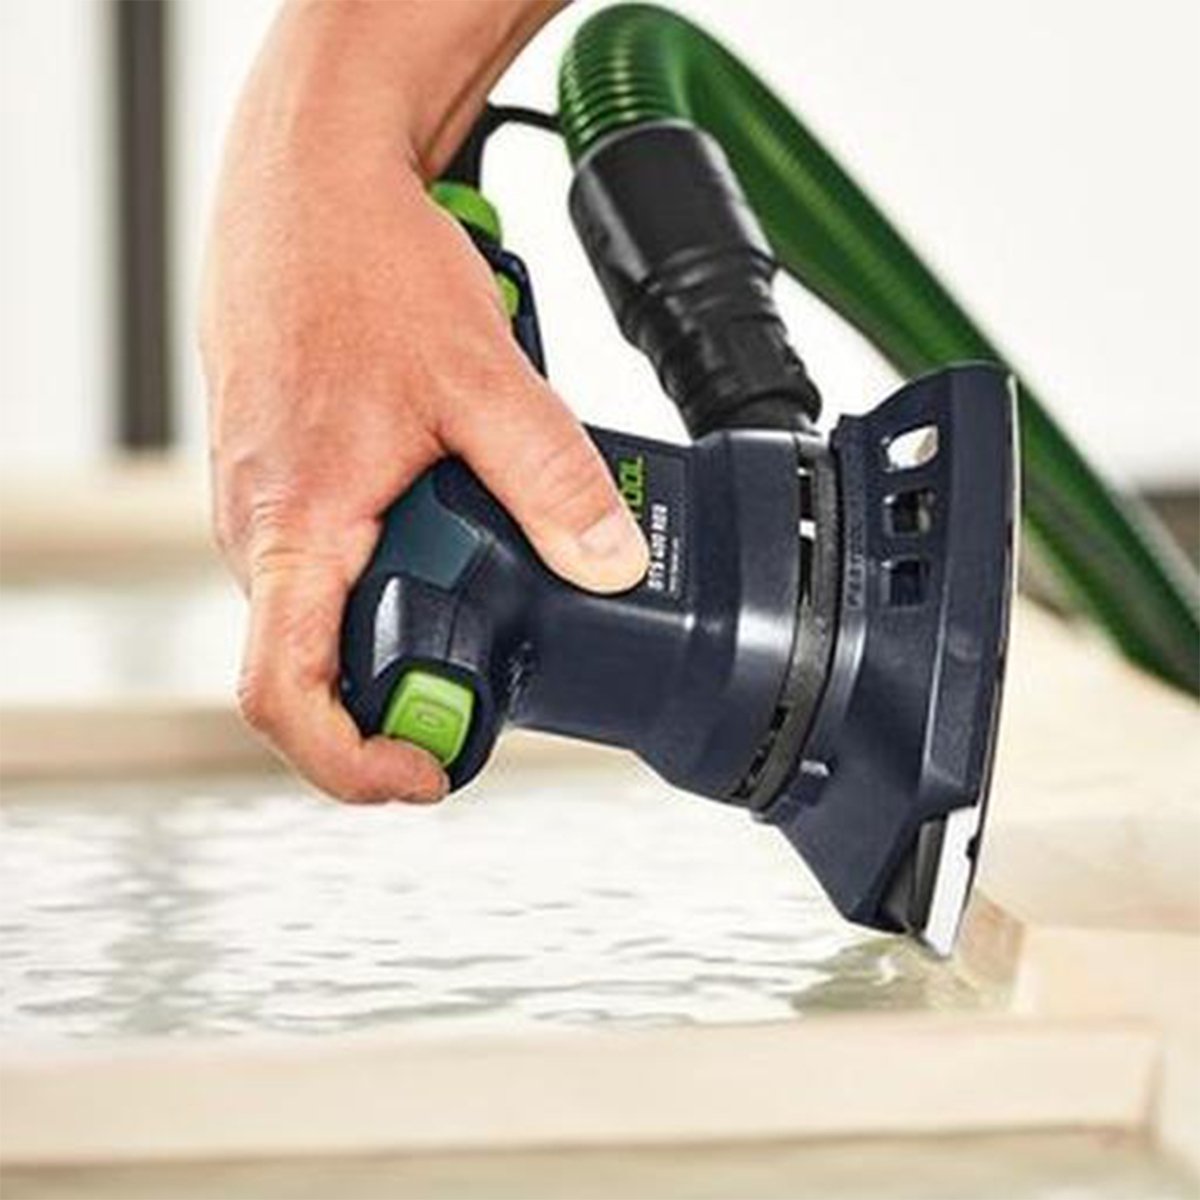 The Festool DTS 400 REQ-Plus detail sander has a triangular pad with bevelled edges to get into corners other sanders can't.